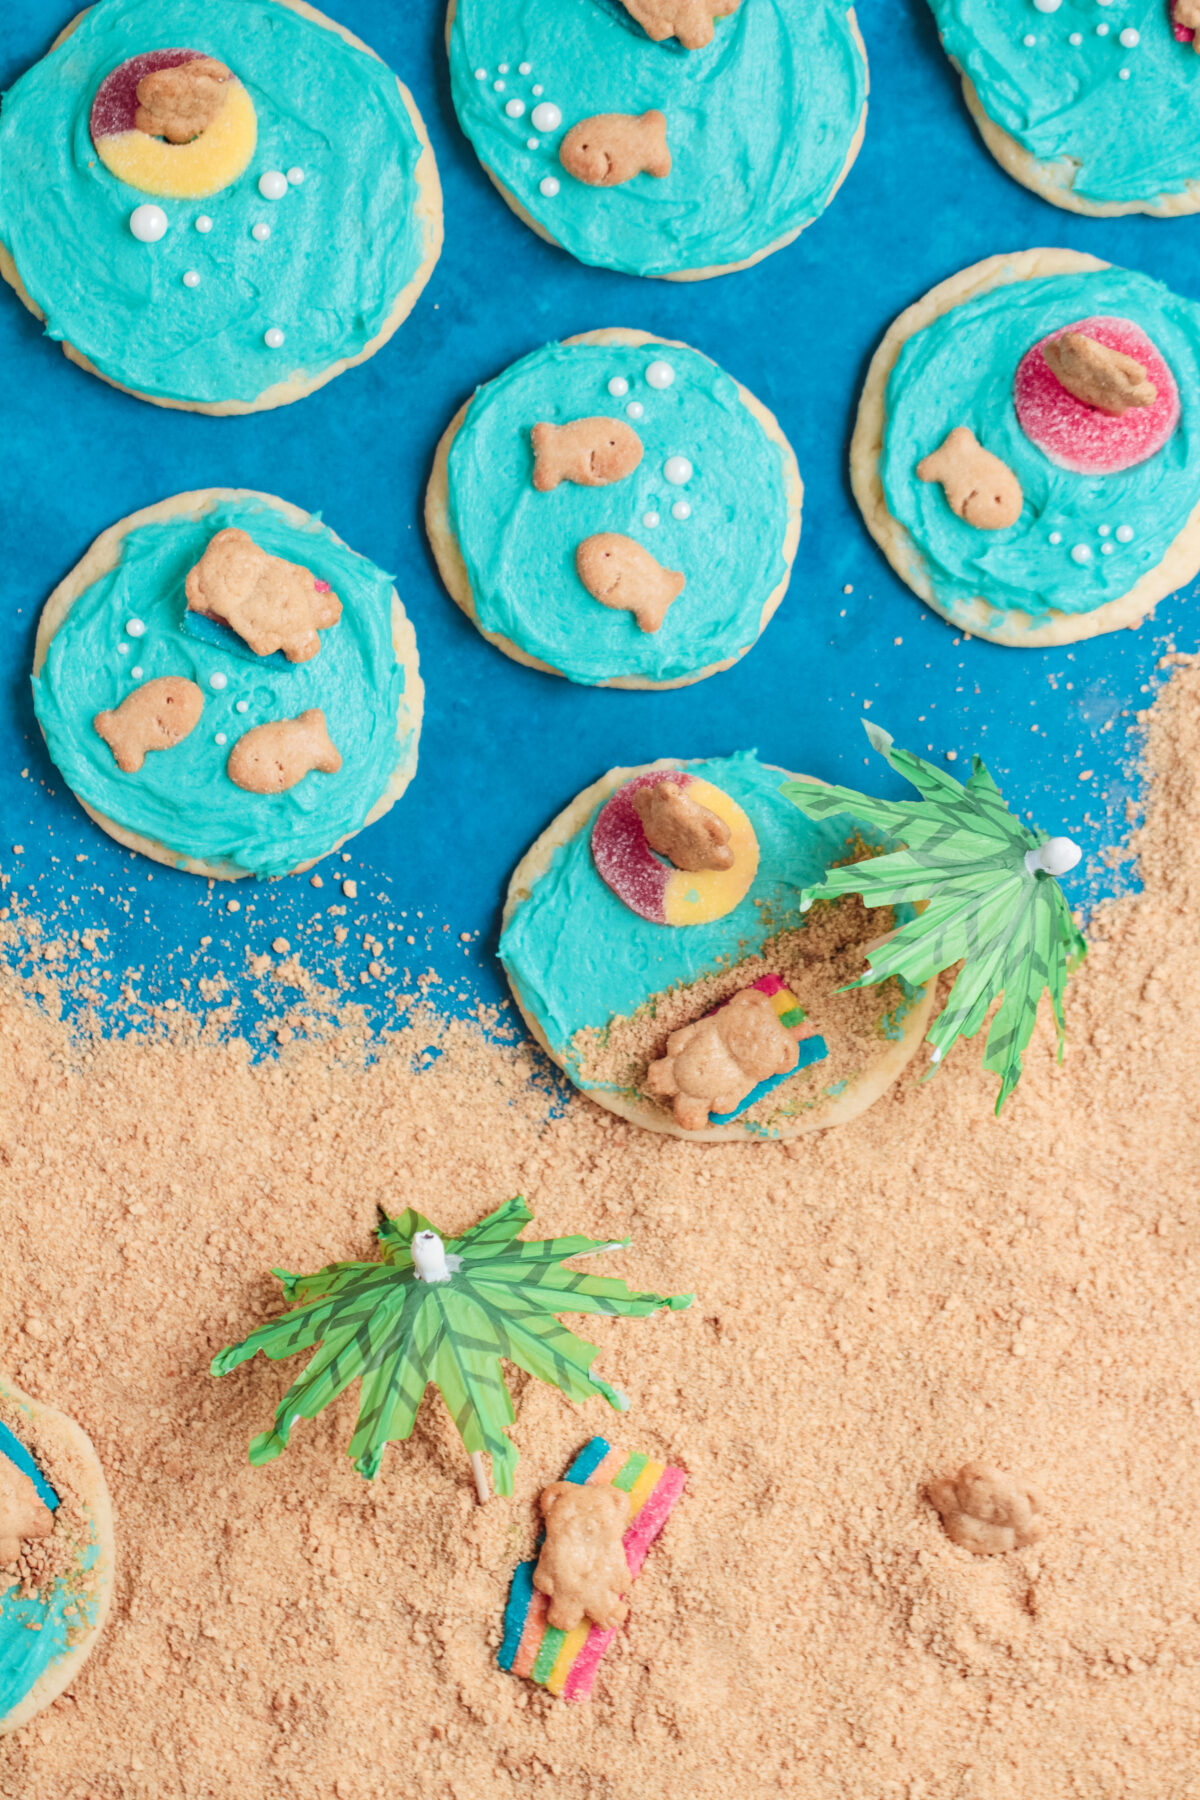 Create an ocean-inspired treat with this easy recipe for beach cookies featuring cream cheese frosting, teddy grahams, and candy decorations!